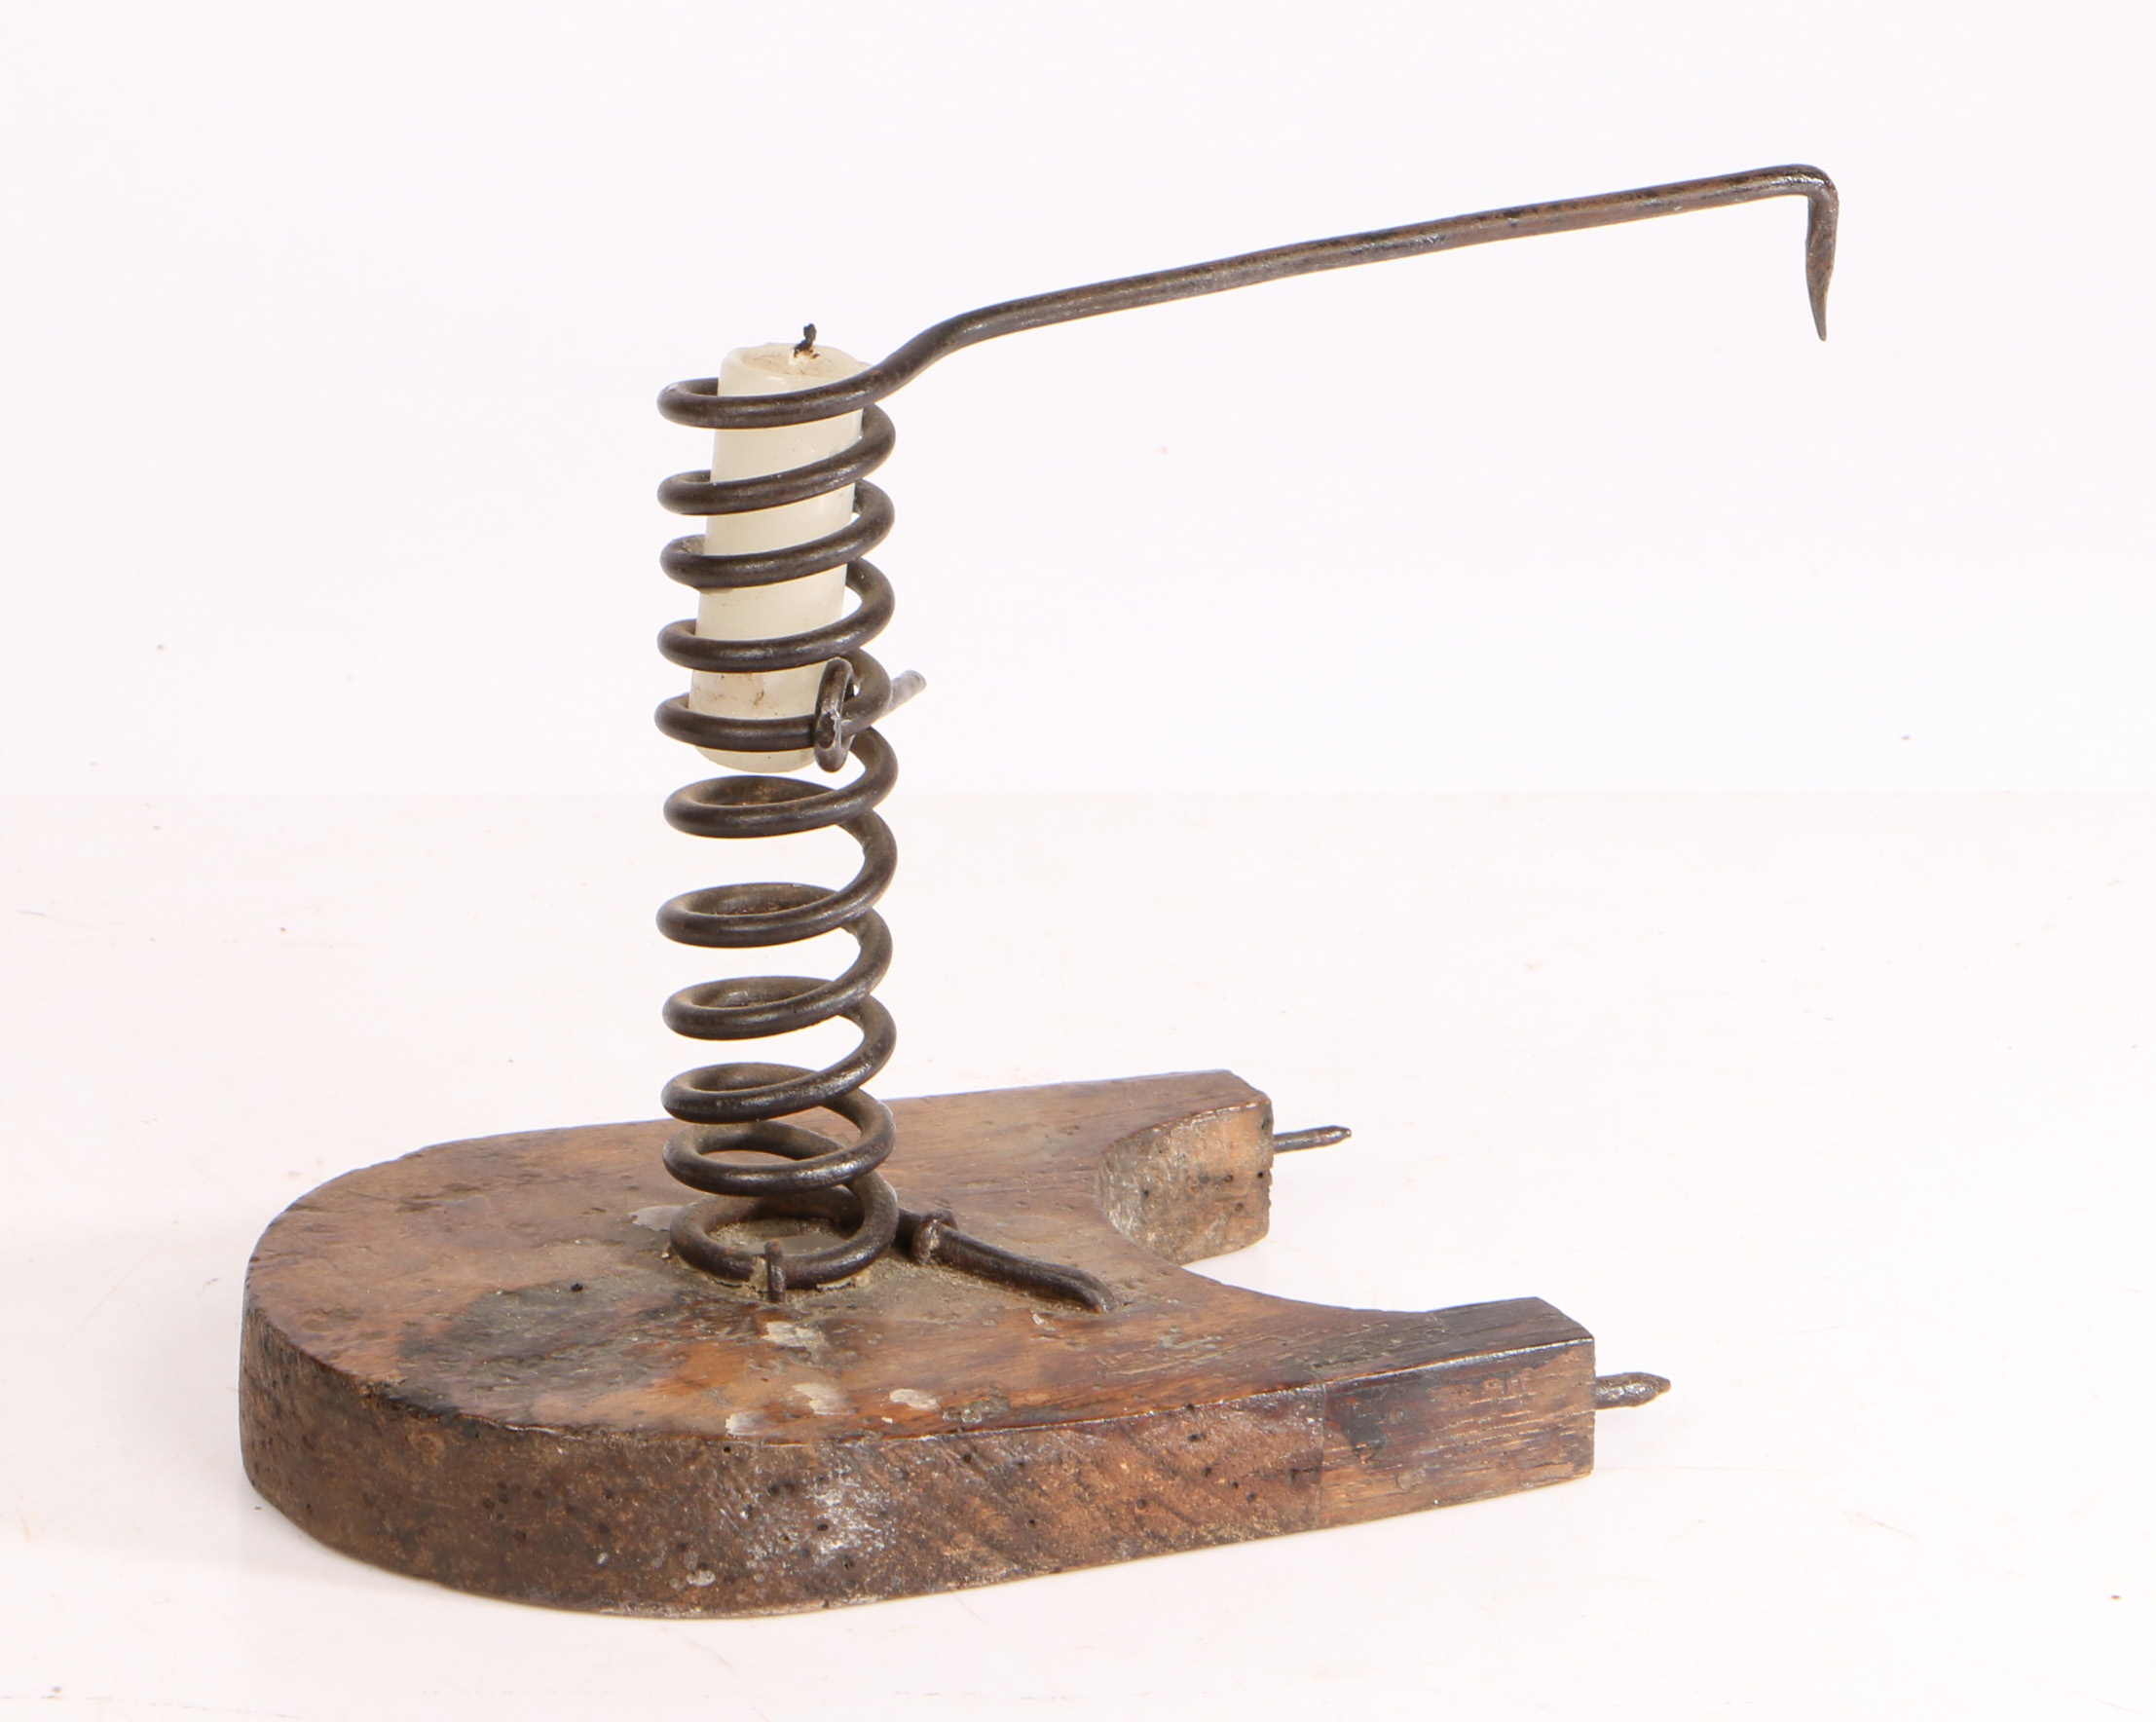 A iron spiral candleholder, the spring shaped holder with curved platform and spikes projecting from